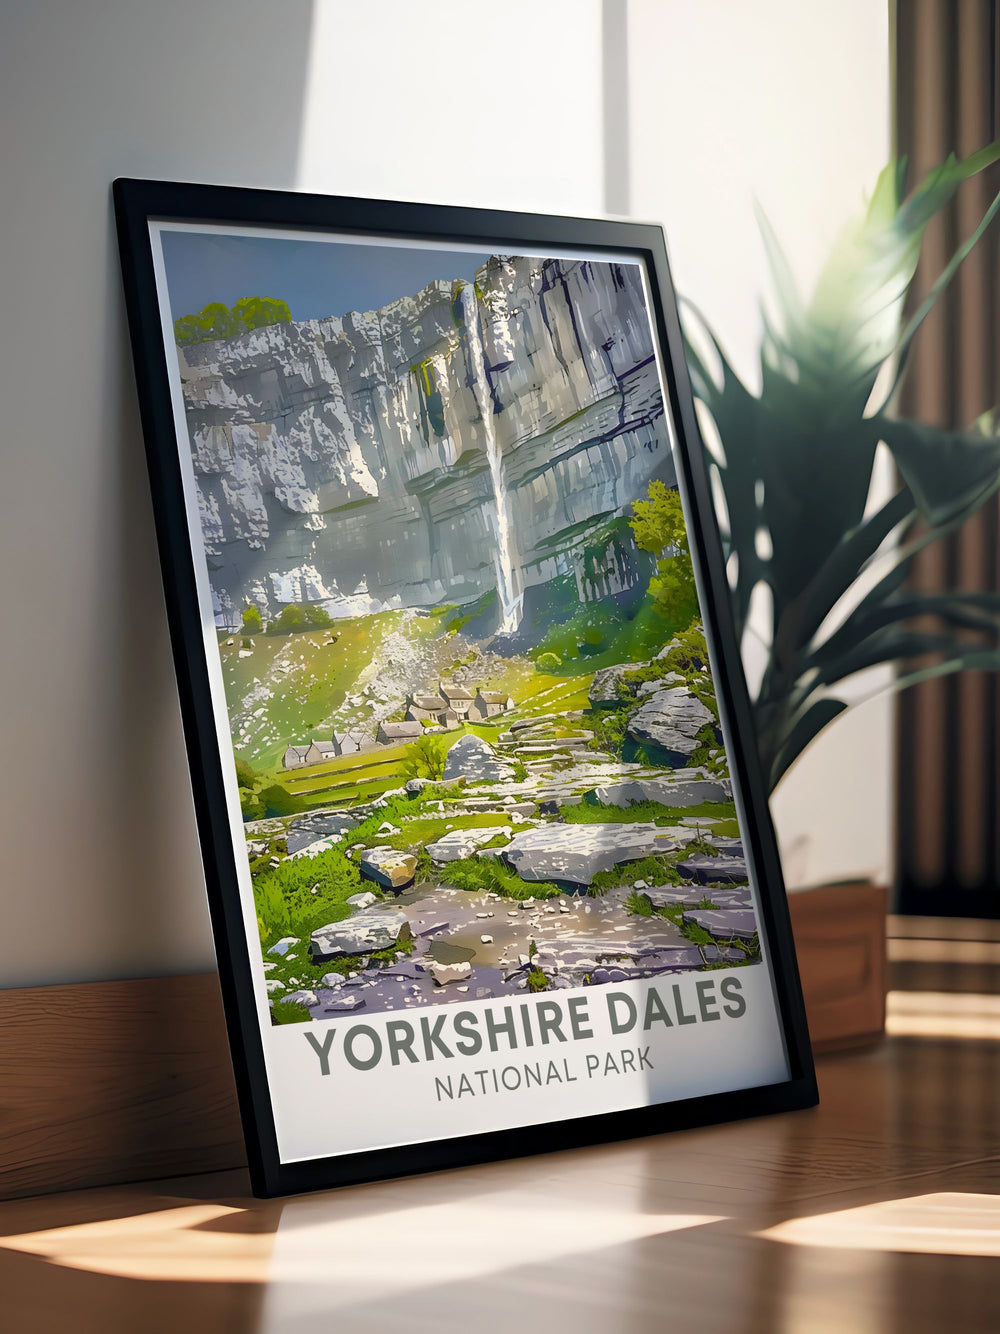 Discover the charm of the Yorkshire Dales with this Malhom Cov posterViaduct featuring stunning views of the iconic viaduct and lush surroundings perfect for any nature lovers home.